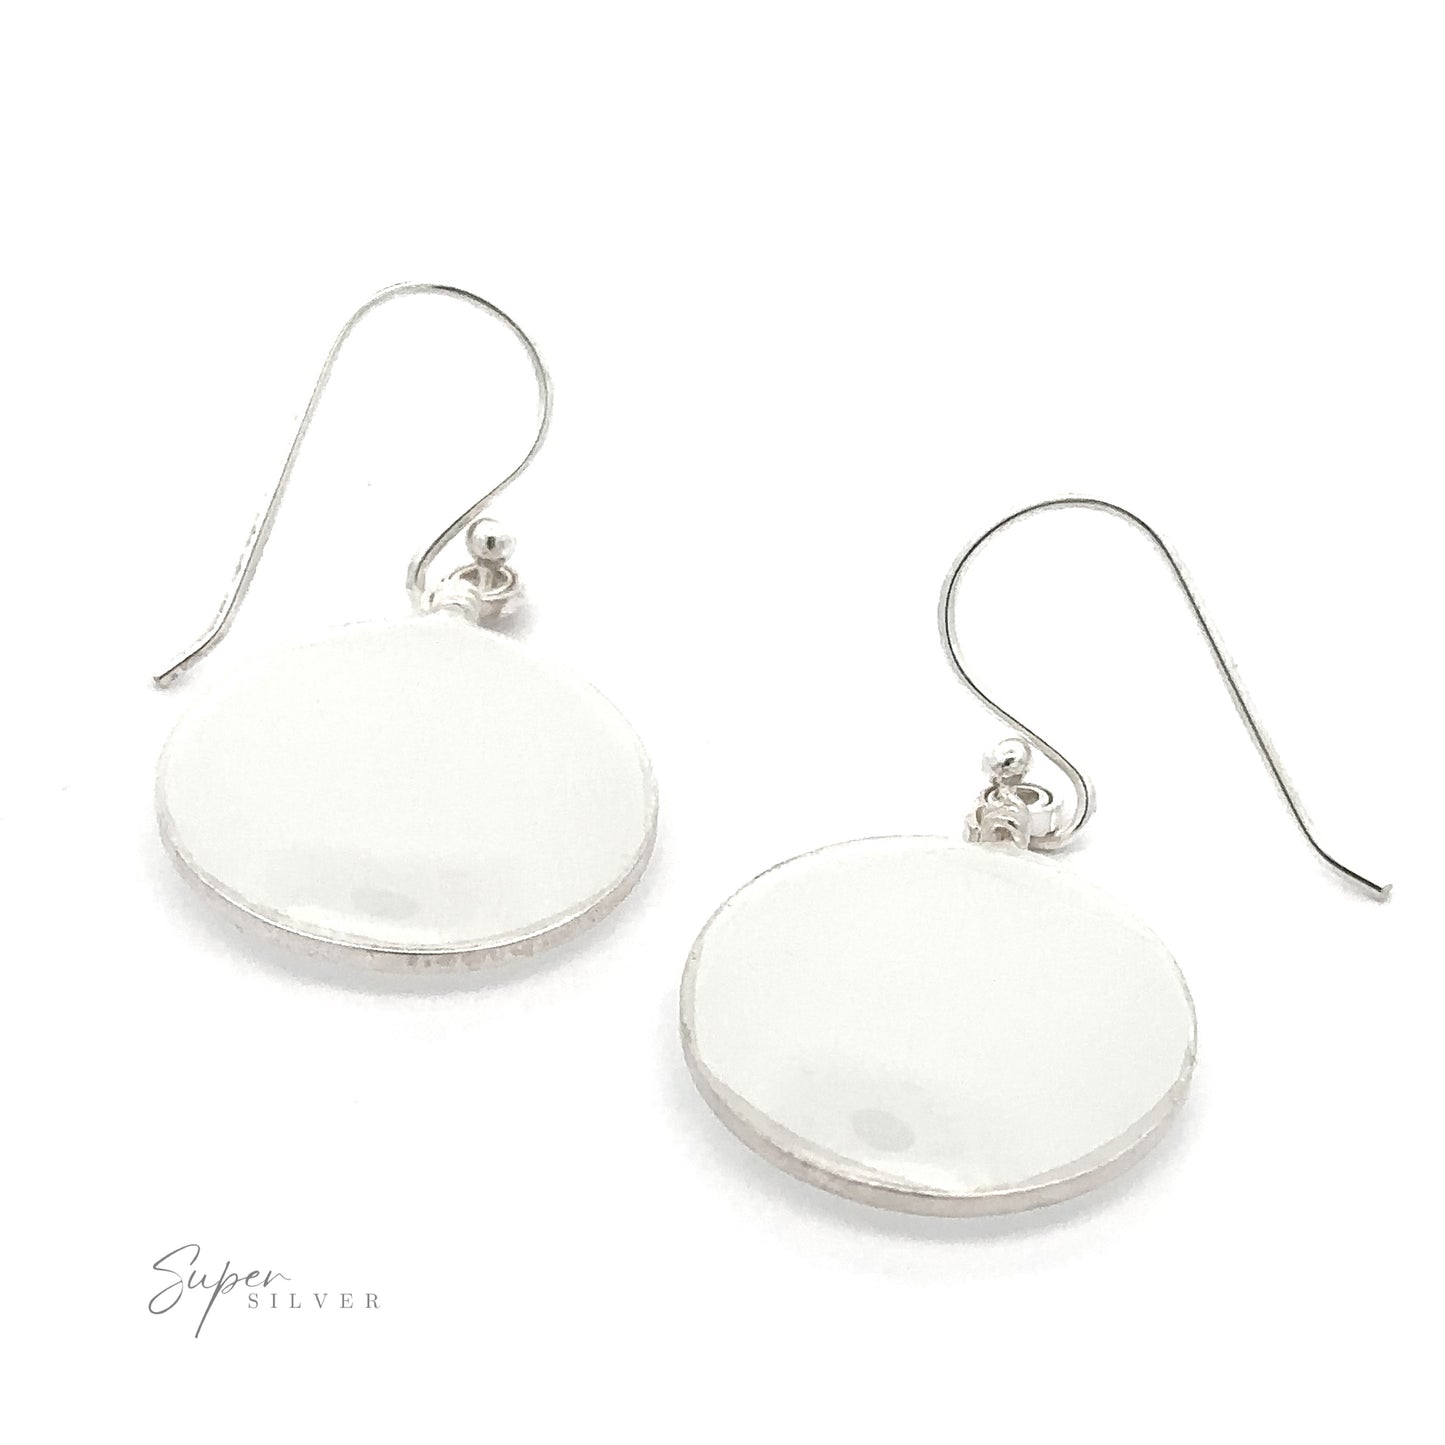 
                  
                    A pair of Round Glass Earrings with .925 Sterling Silver hooks on a white background. "Super Silver" is written in the bottom-left corner.
                  
                